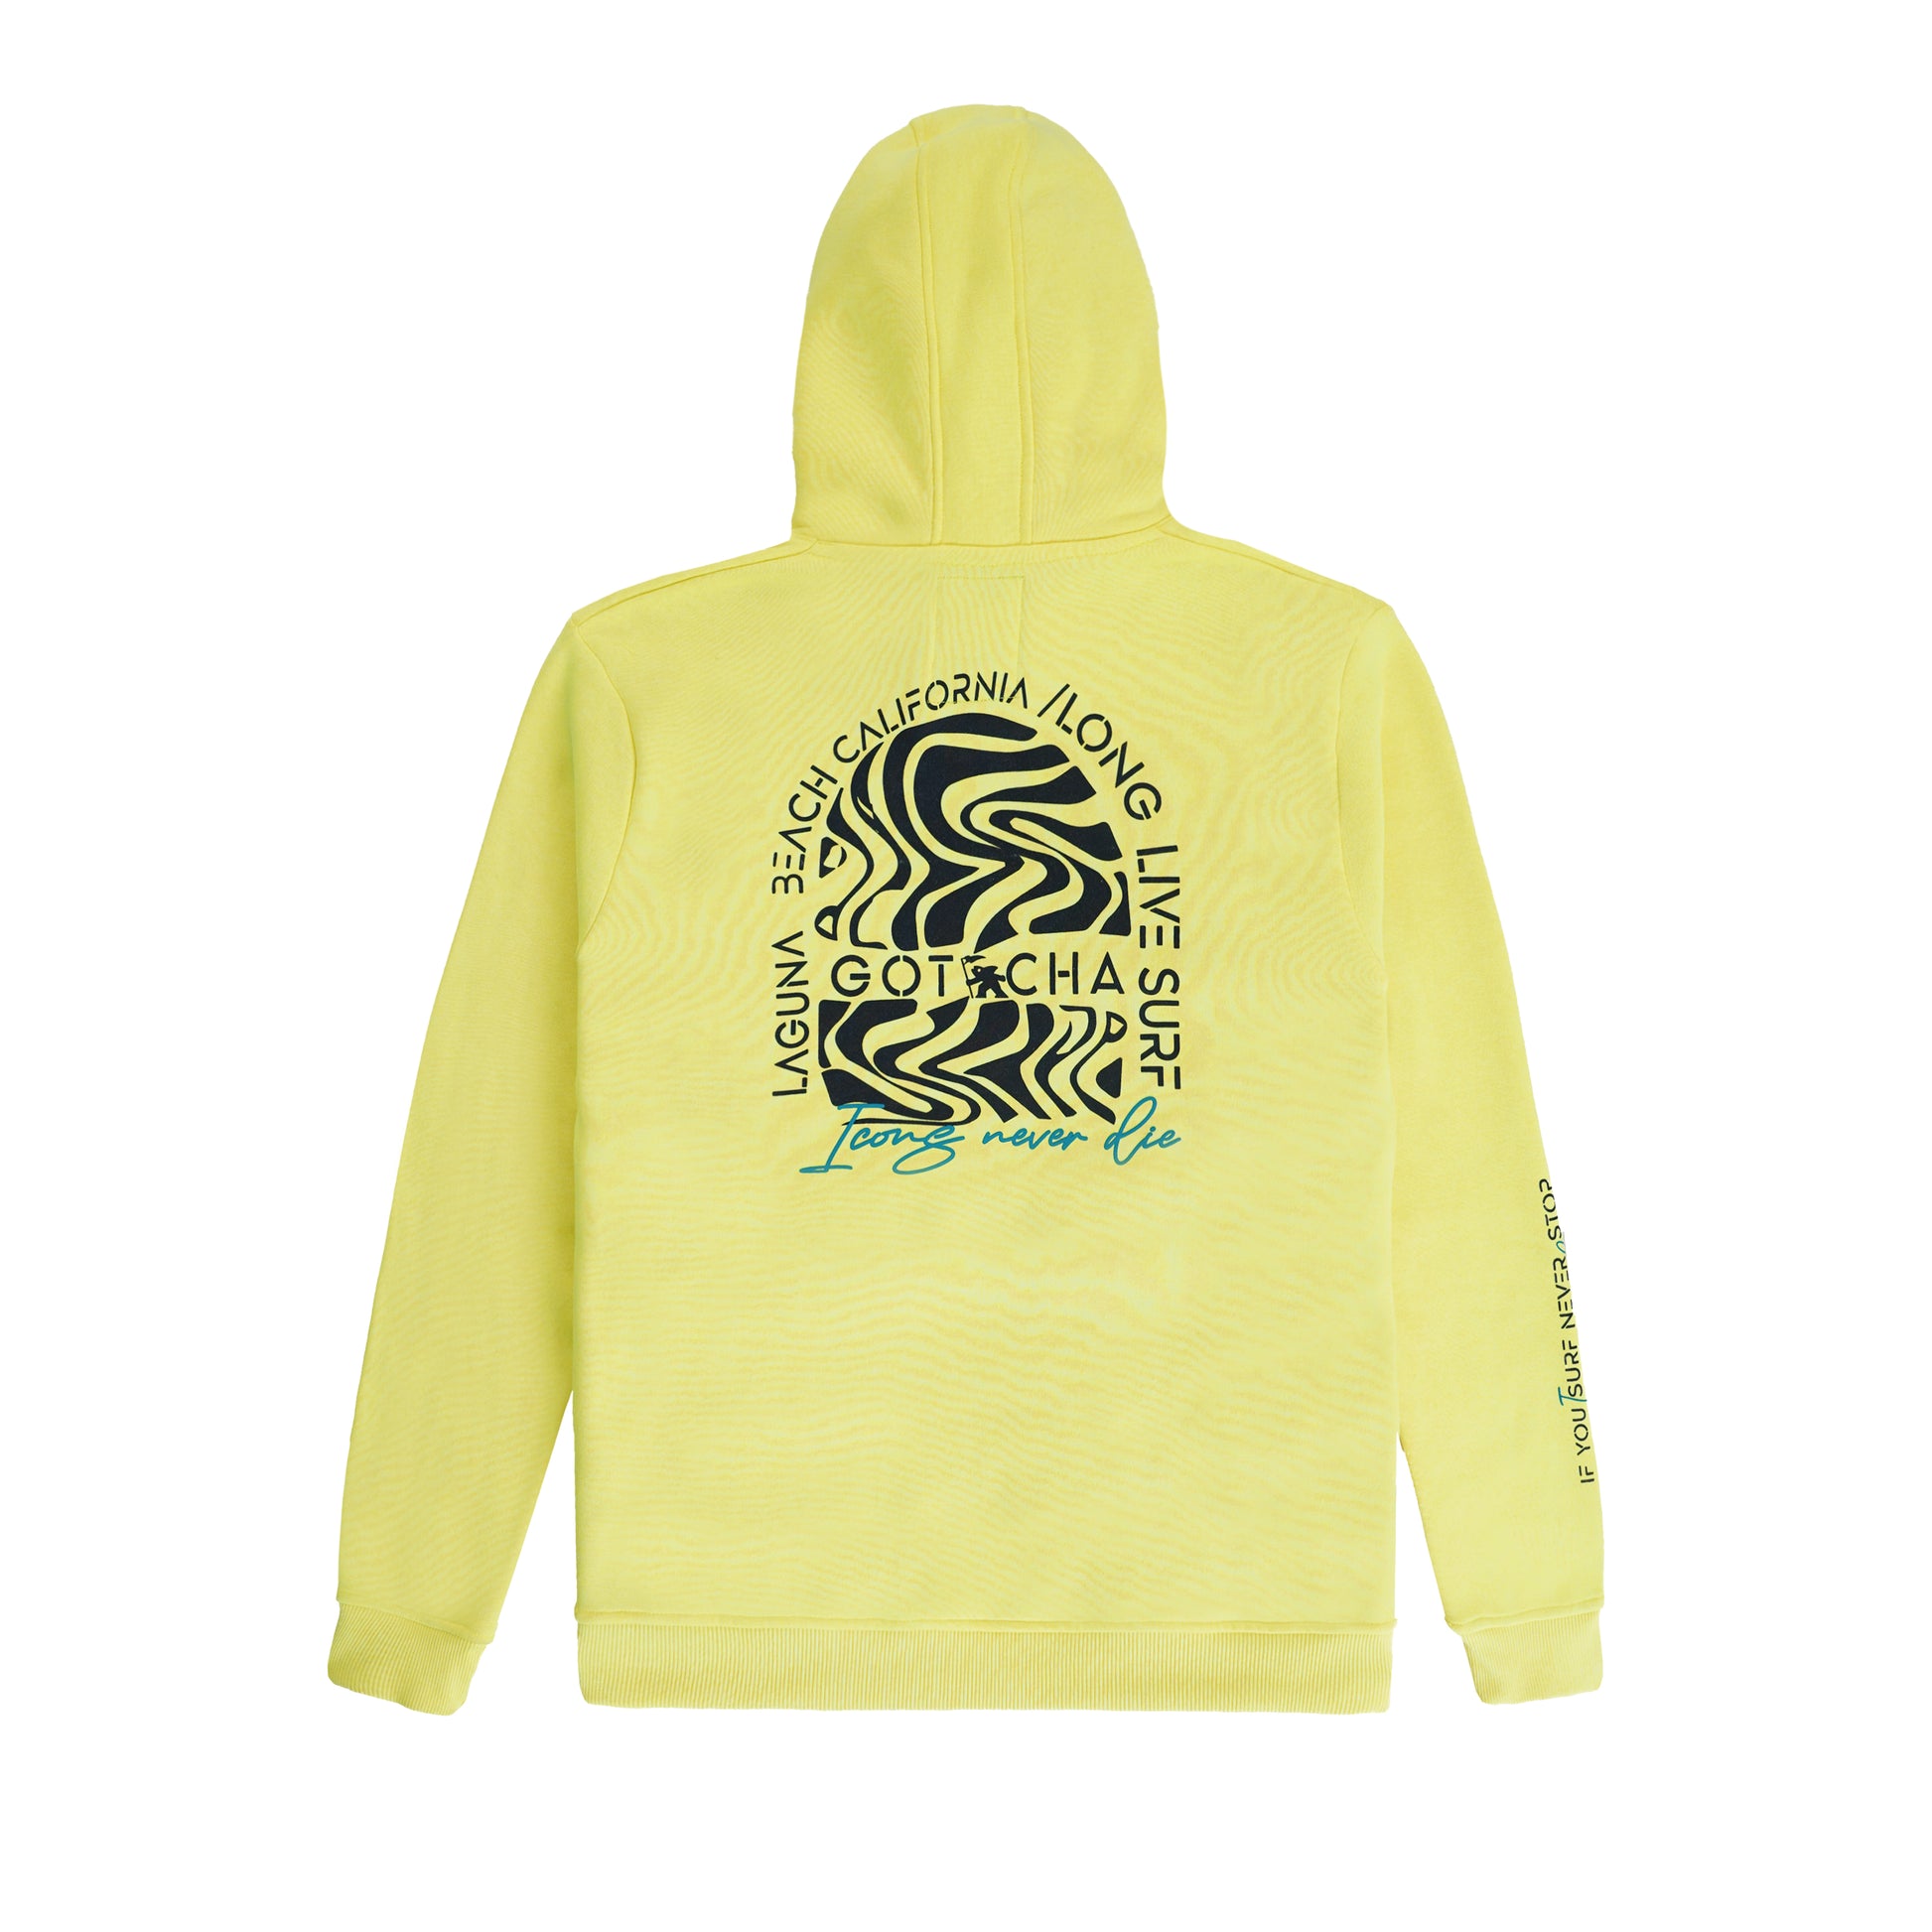 Gotcha branded yellow hoodie for men